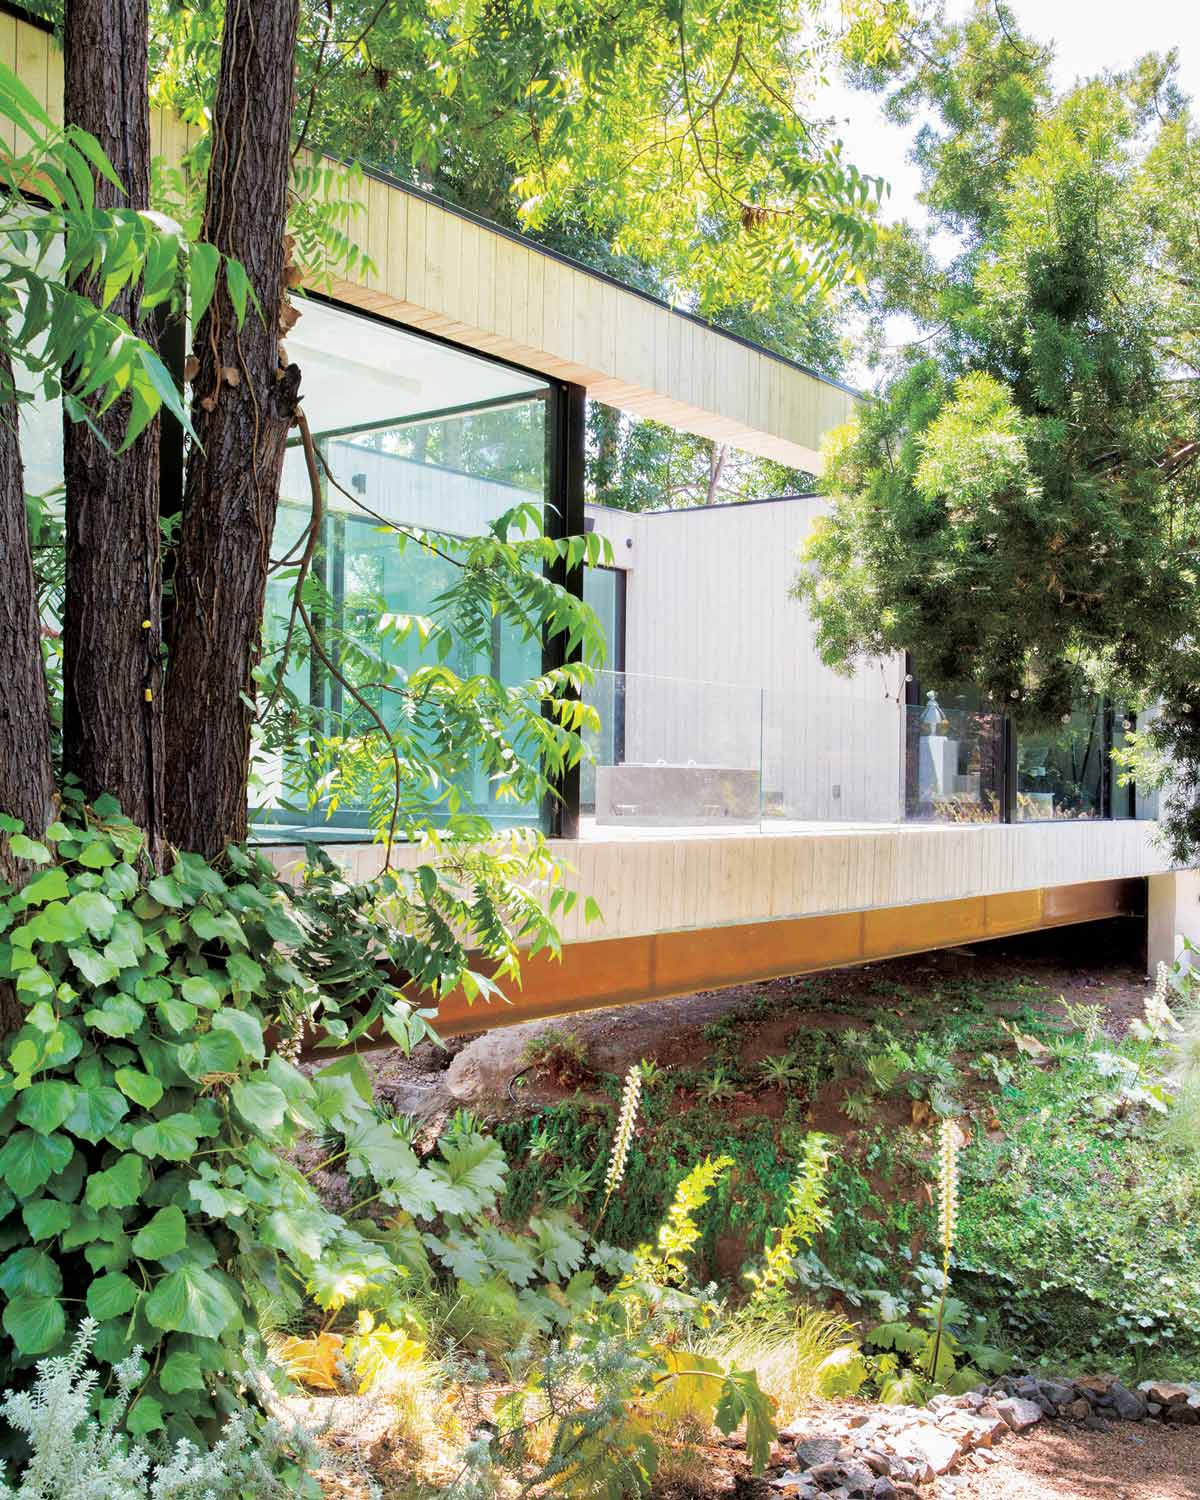 [Architect Dan Brune's House]A bridge house above a stream in a luxury residential area in central LA!